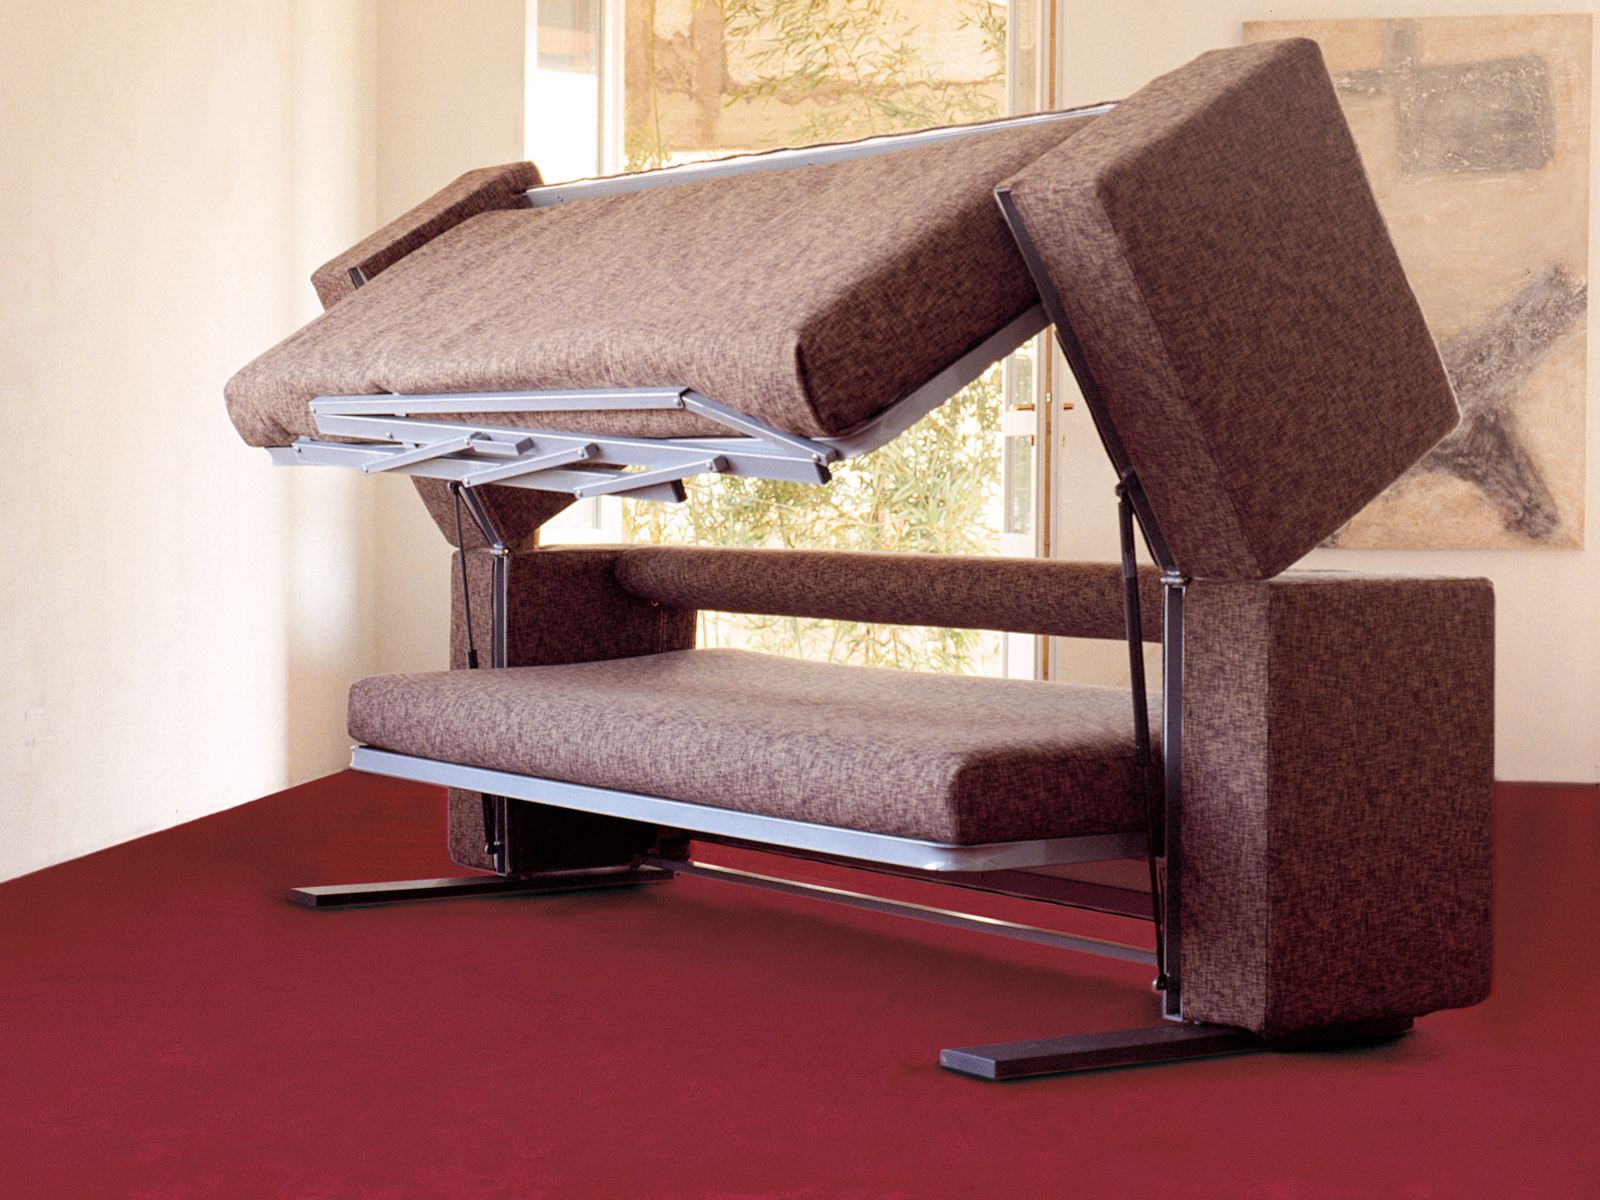 bink bed that folds into a sofa